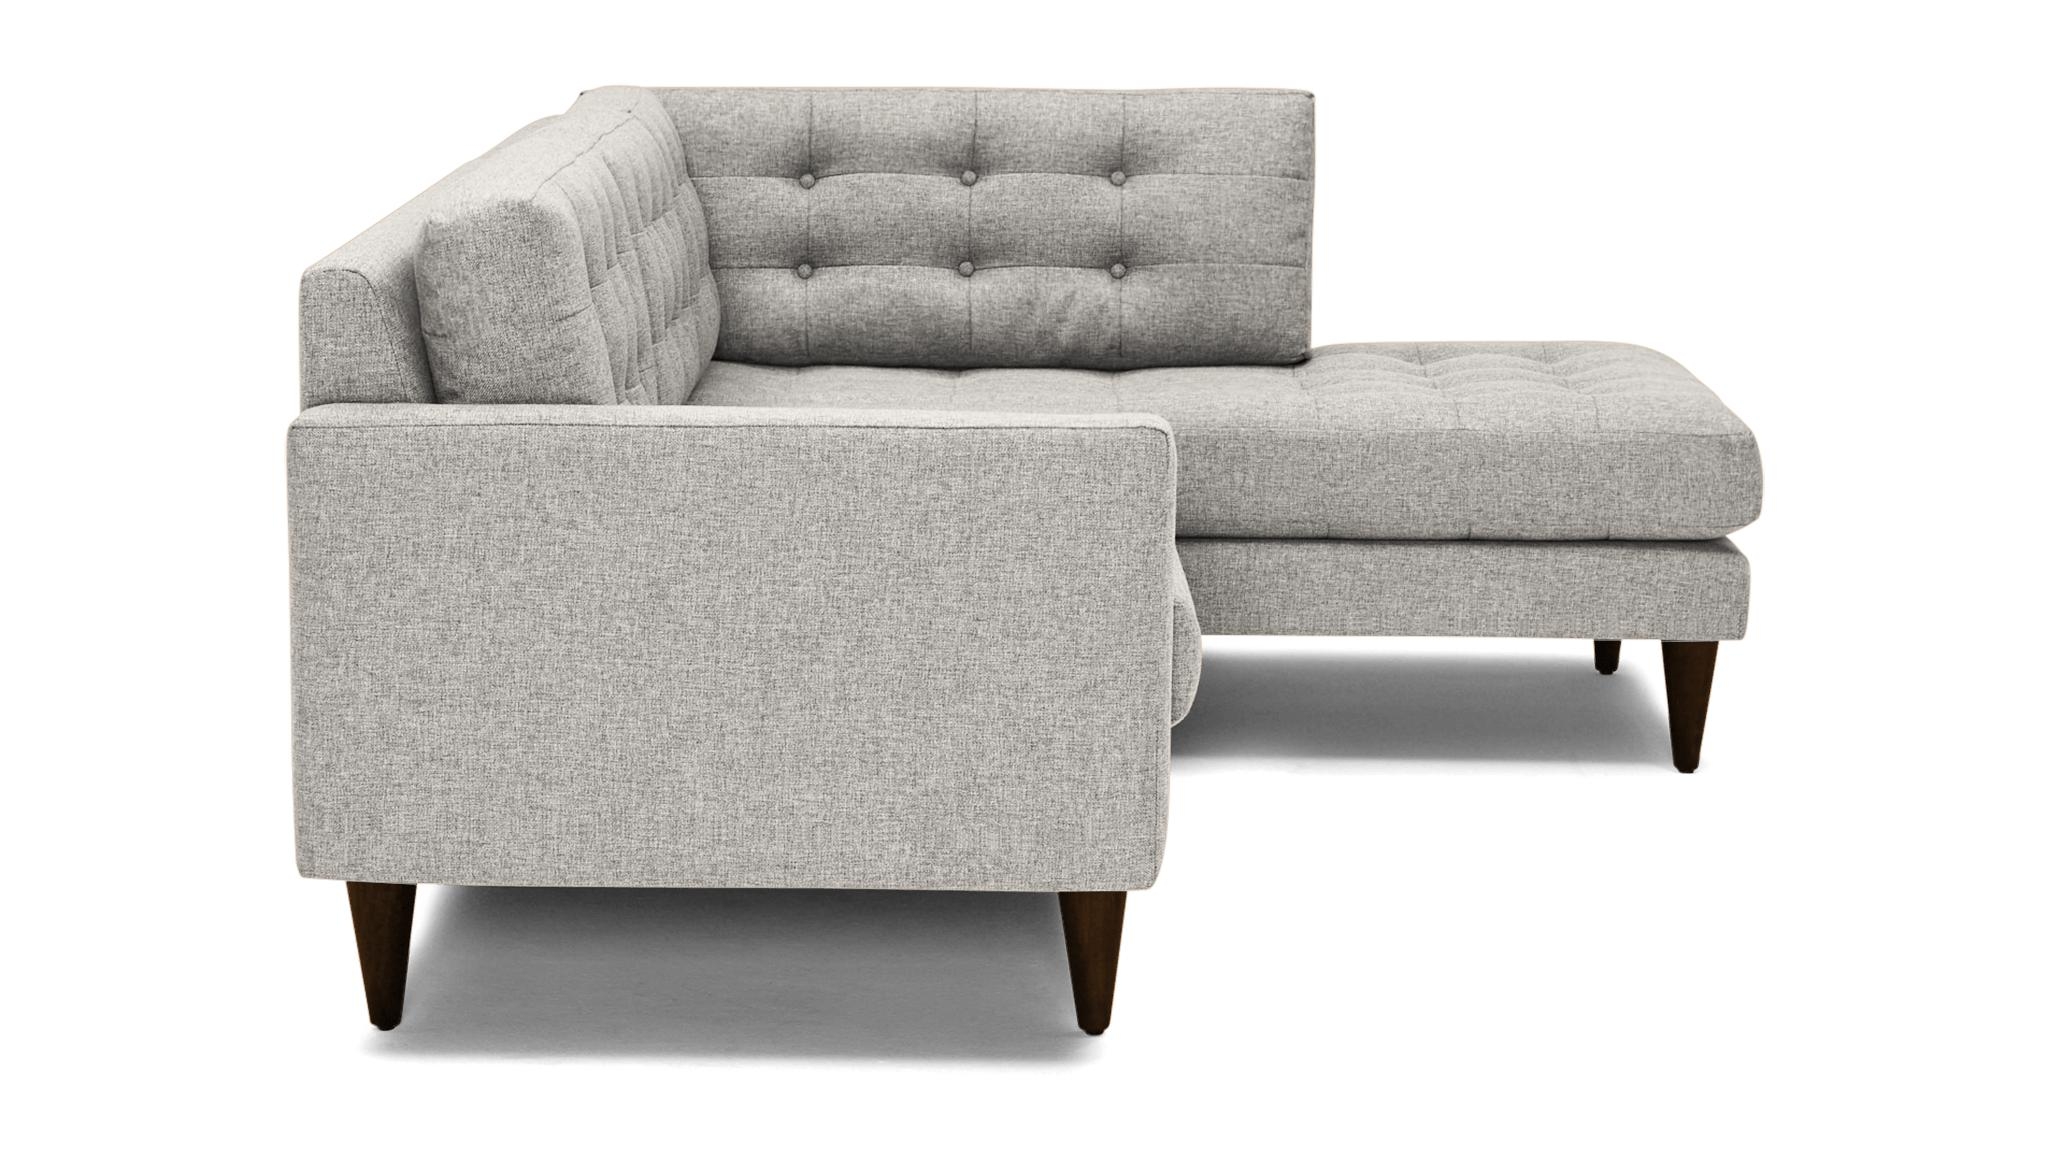 White Eliot Mid Century Modern Apartment Sectional with Bumper - Tussah Snow - Mocha - Right  - Image 1